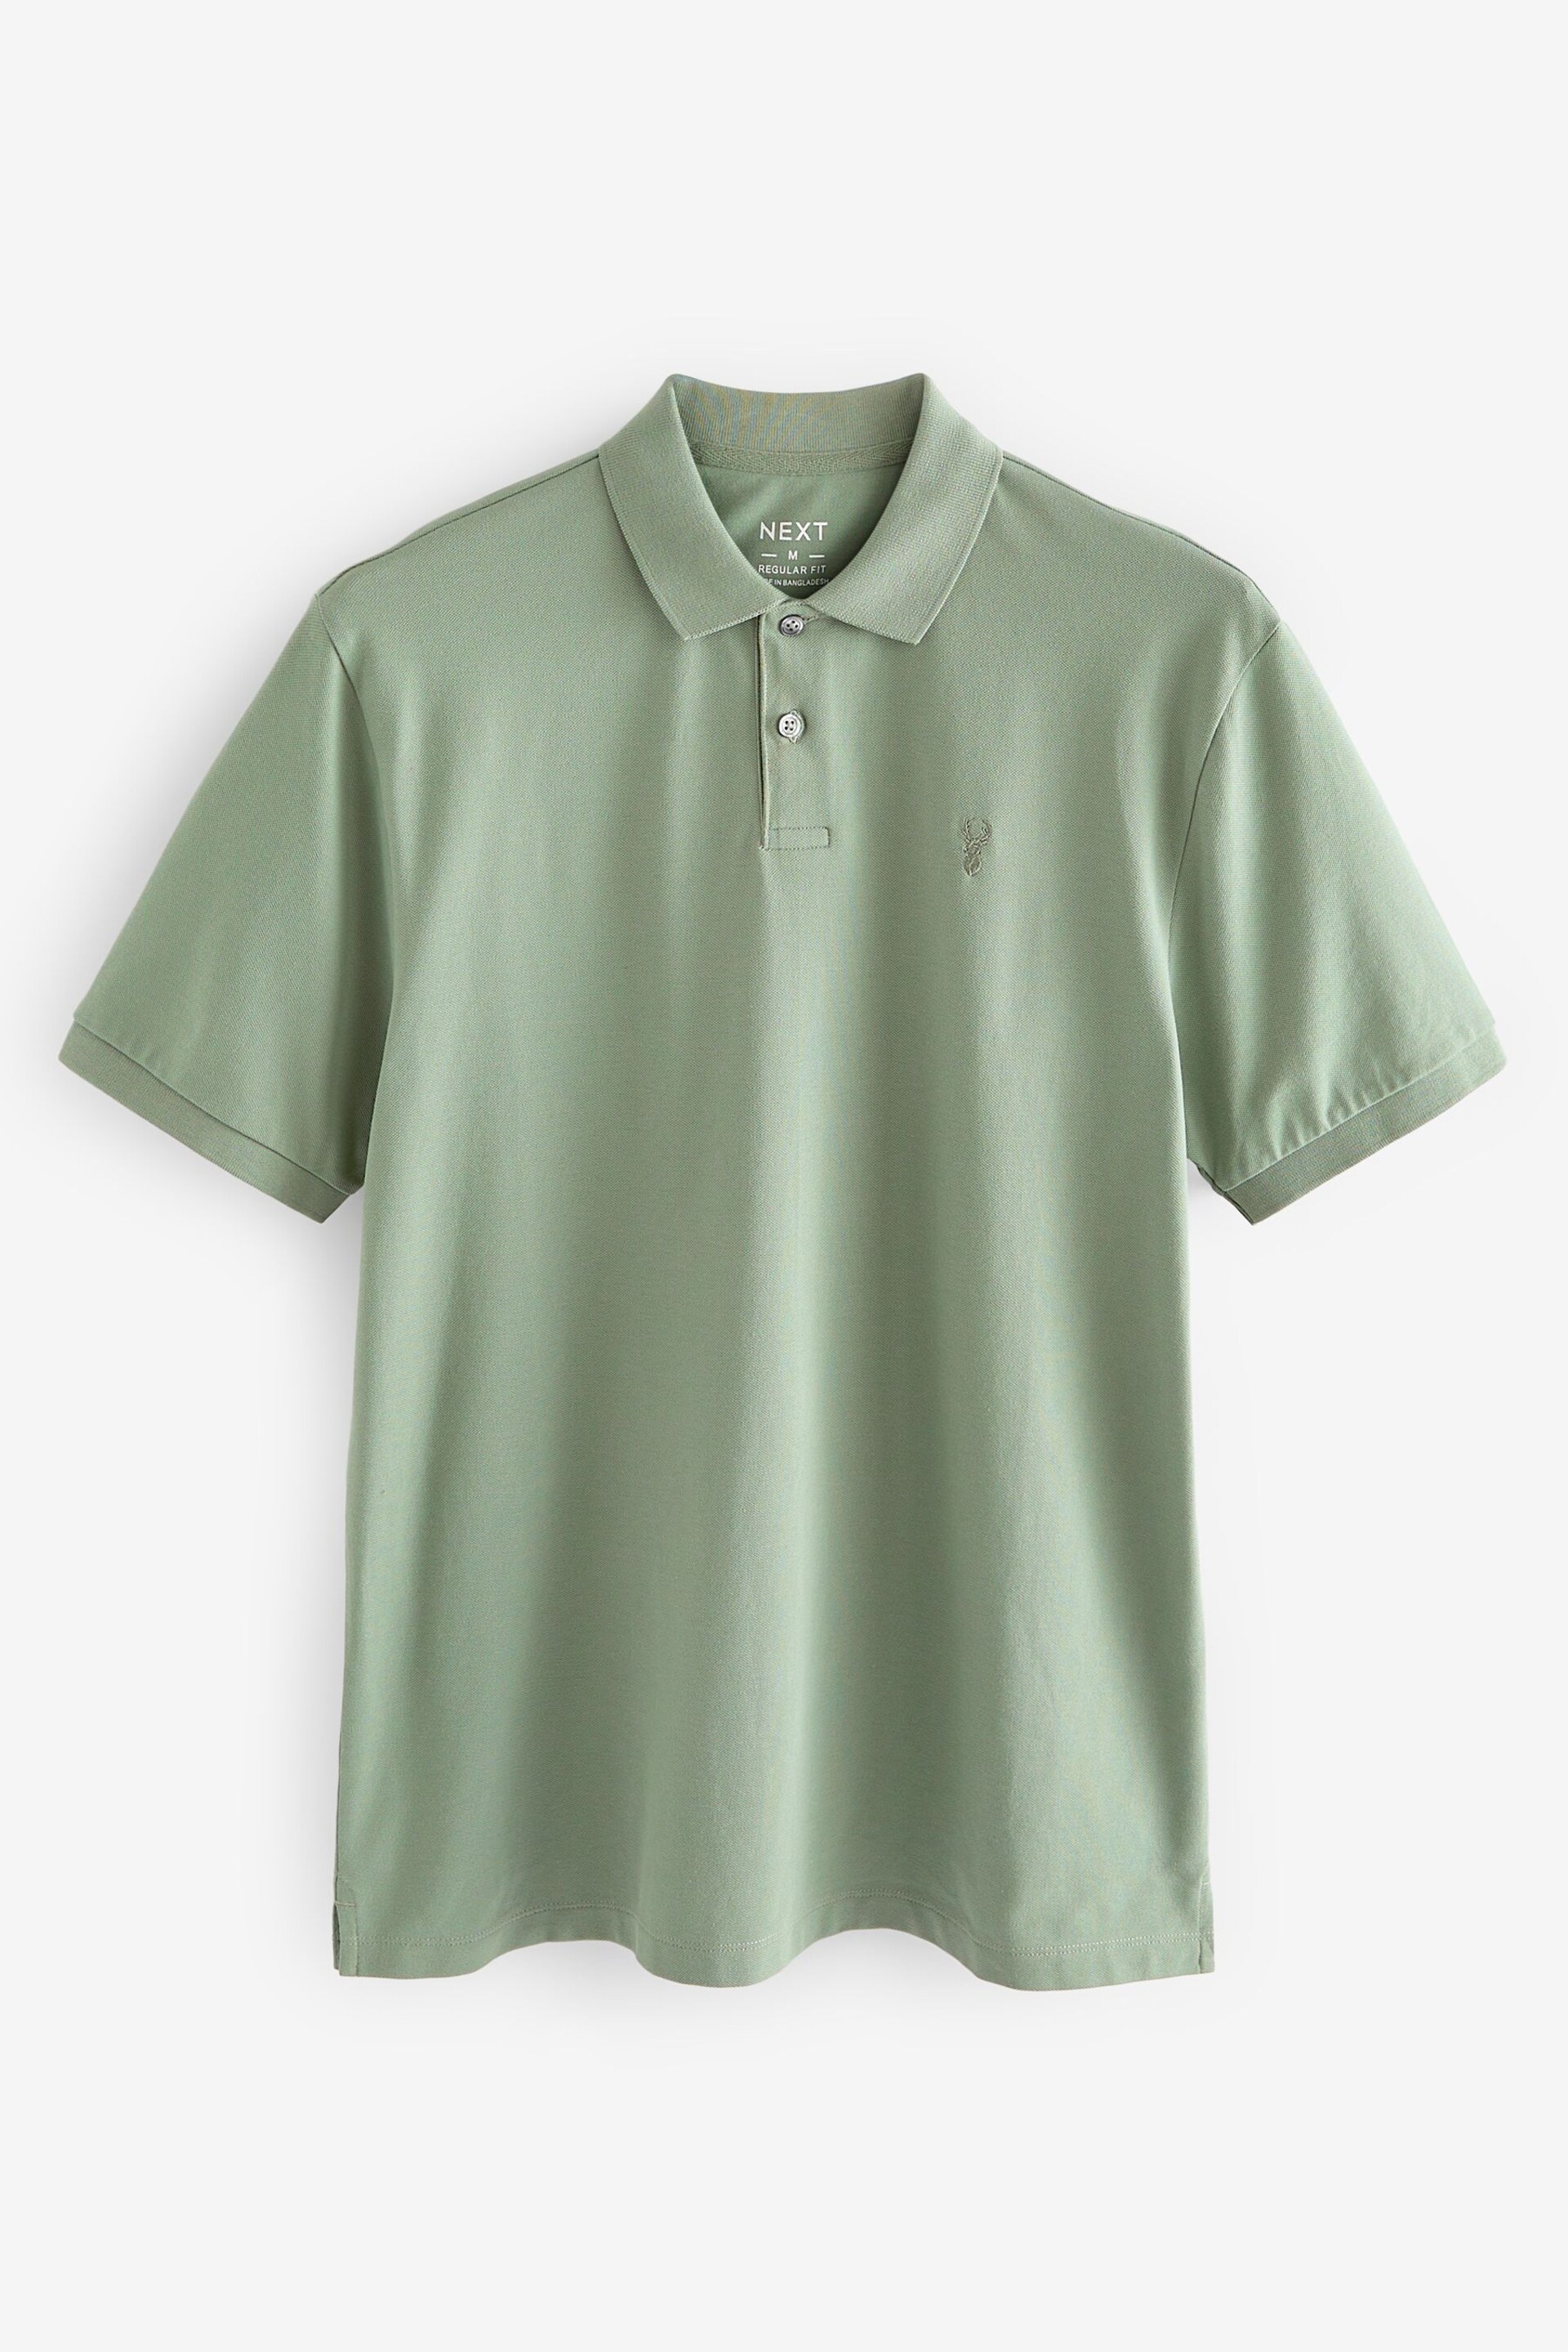 Green Regular Fit Pique Polo Shirt - Image 6 of 8